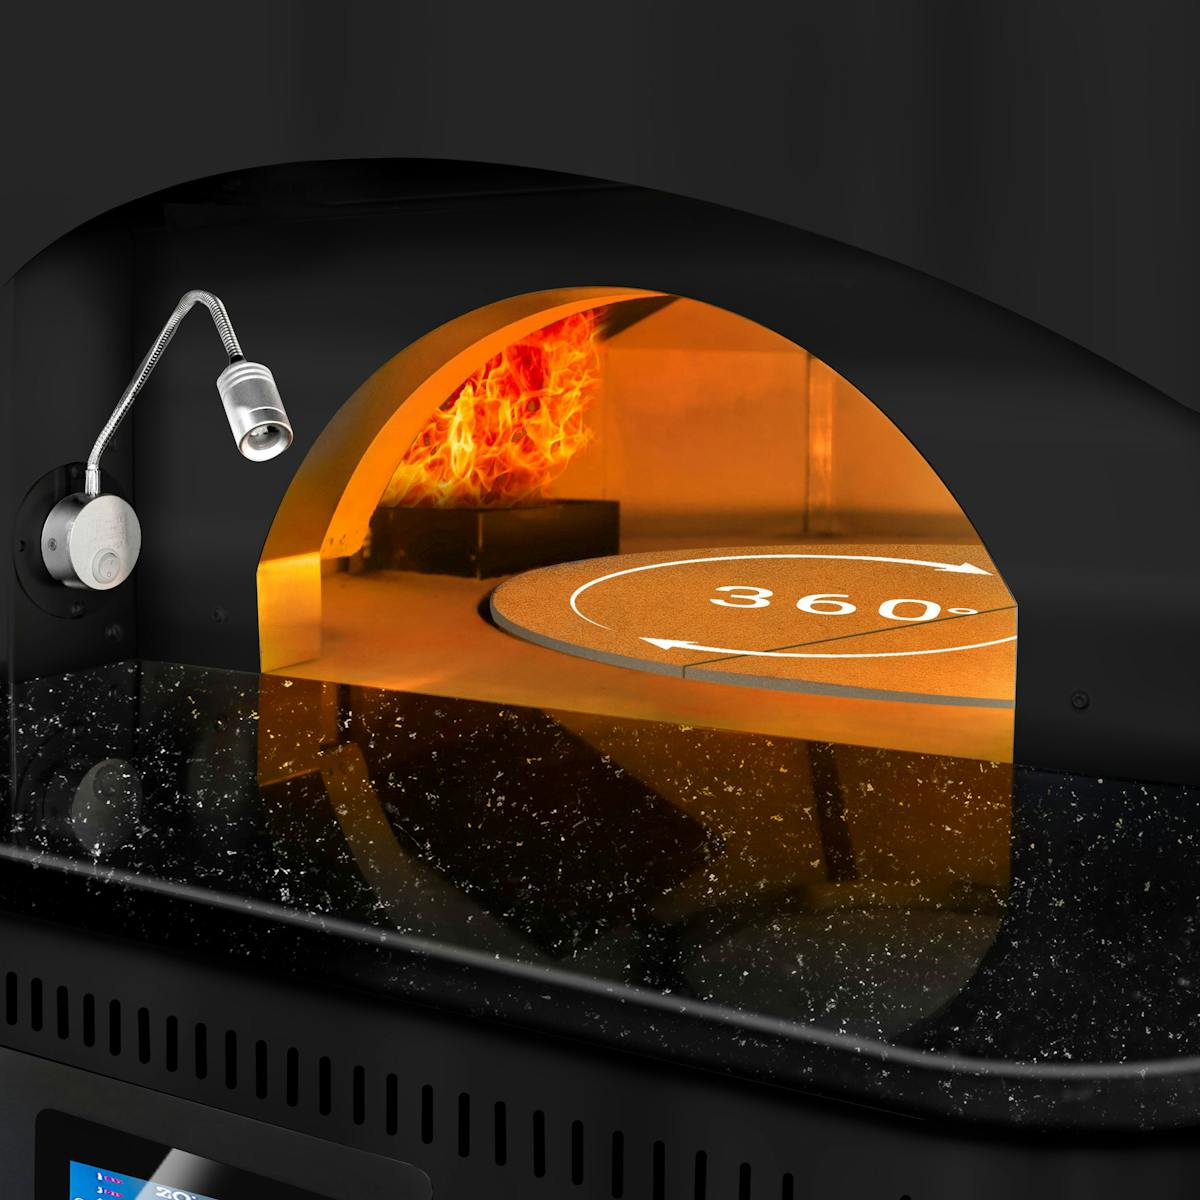 Gas stone pizza oven - 9x 30 cm - rotating